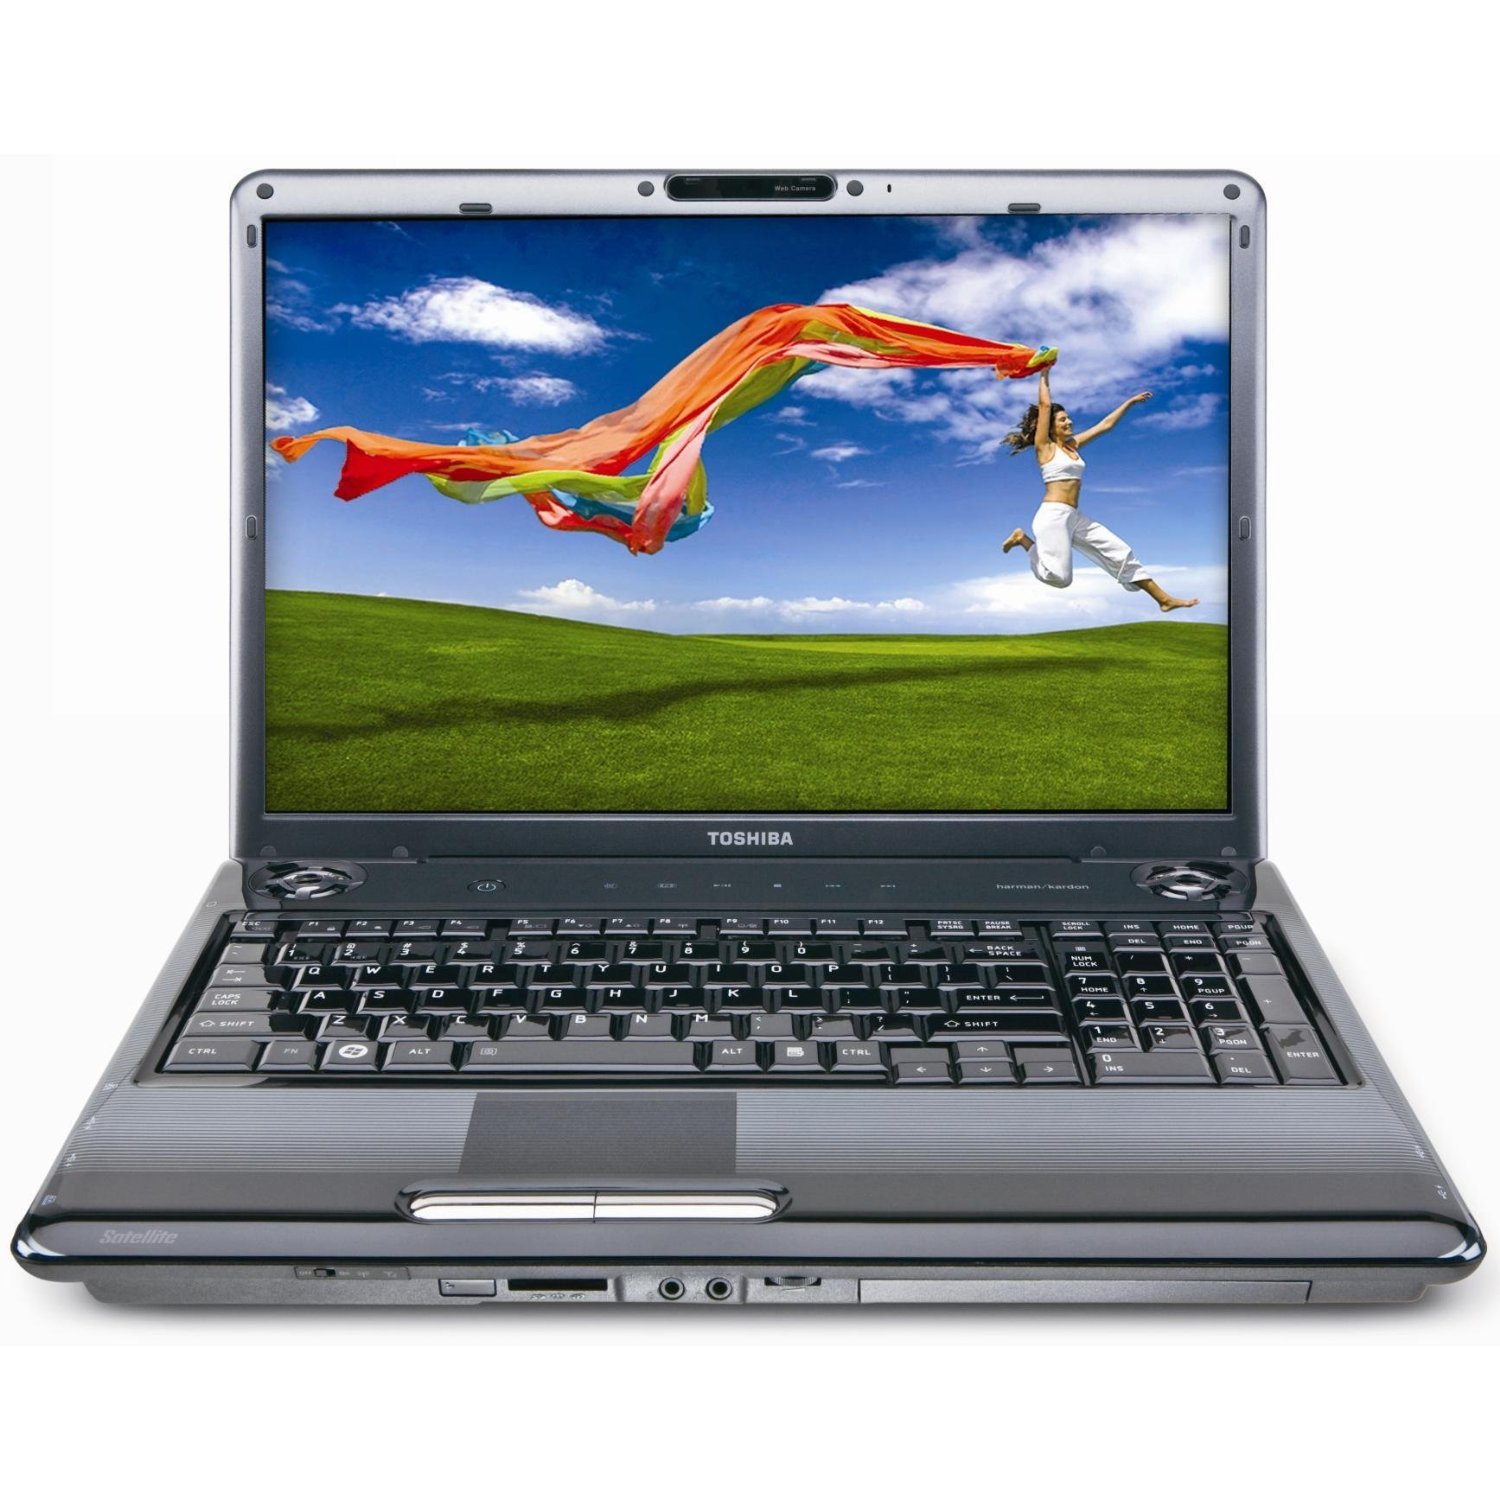 http://thetechjournal.com/wp-content/uploads/images/1111/1320148584-toshiba-satellite-p305s8915-170inch-laptop-1.jpg